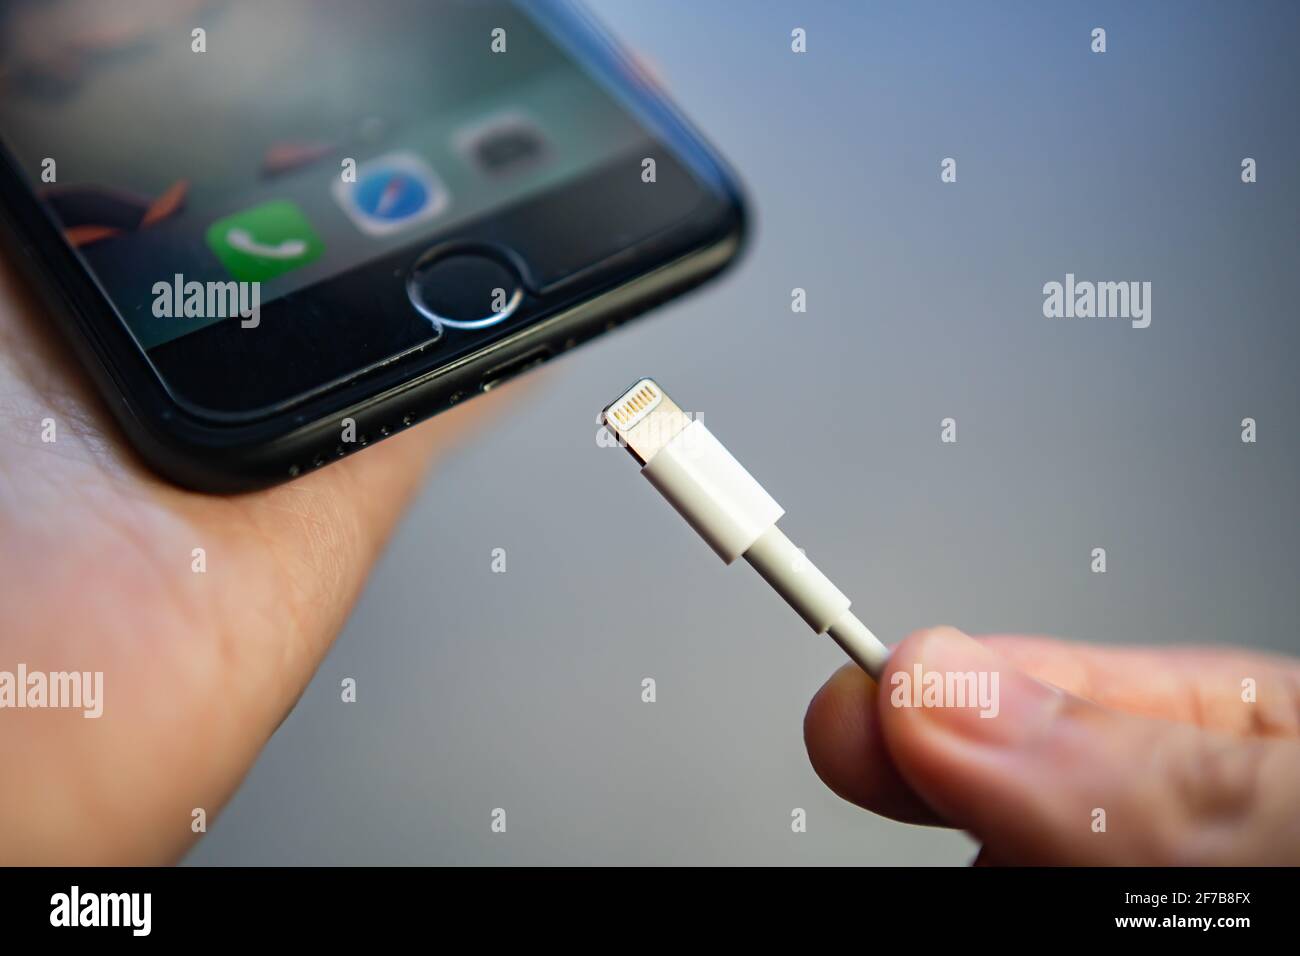 Bangkok, Thailand - April 2, 2021 : Charging iPhone 7 with lightning cable. Stock Photo